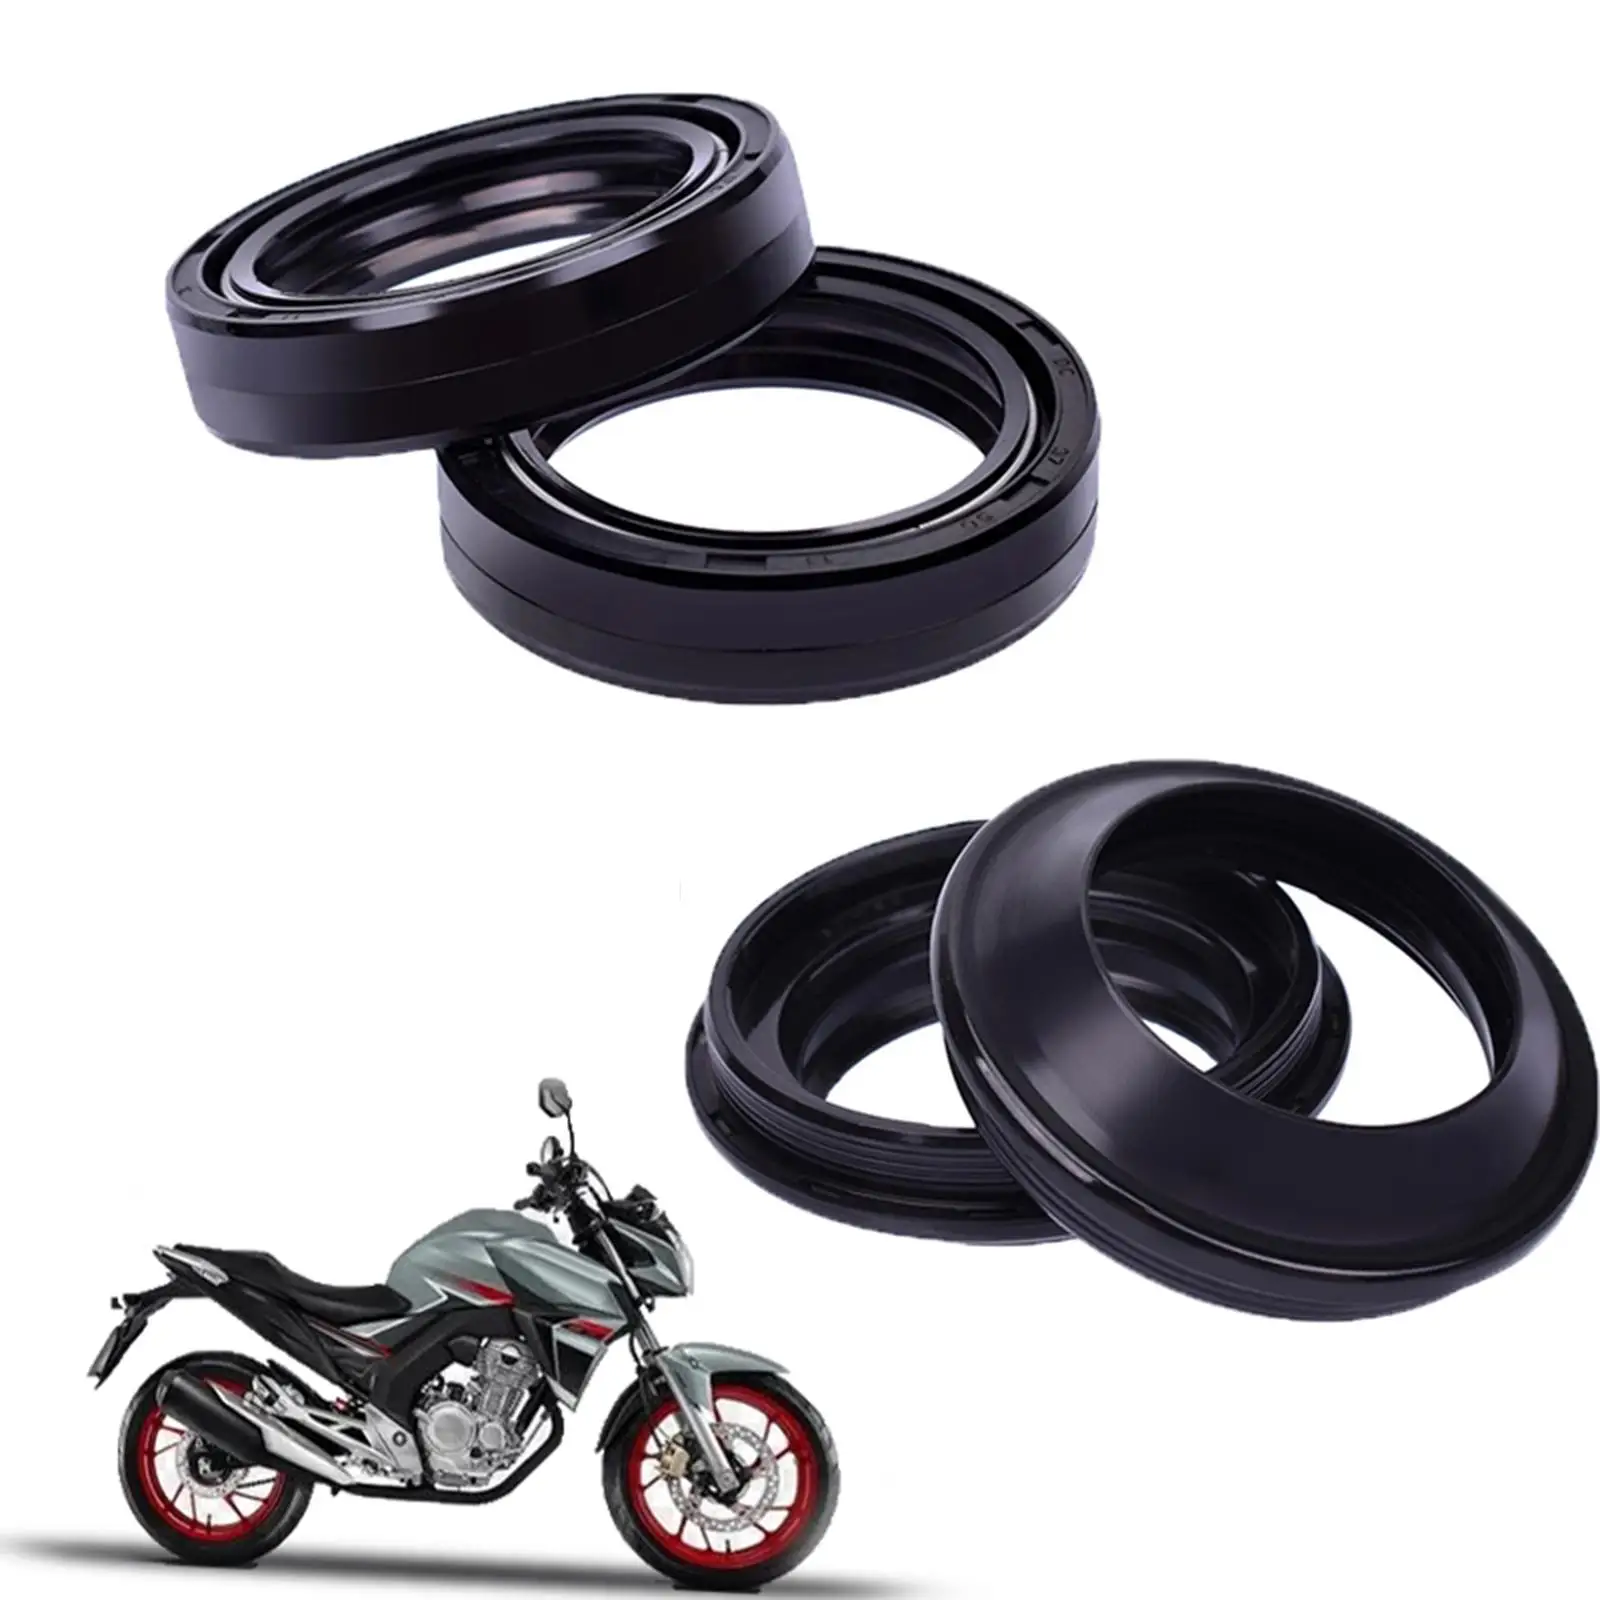 Front Fork Shock Absorber Oil Seals Repair Parts 37x50x11mm Replacement for